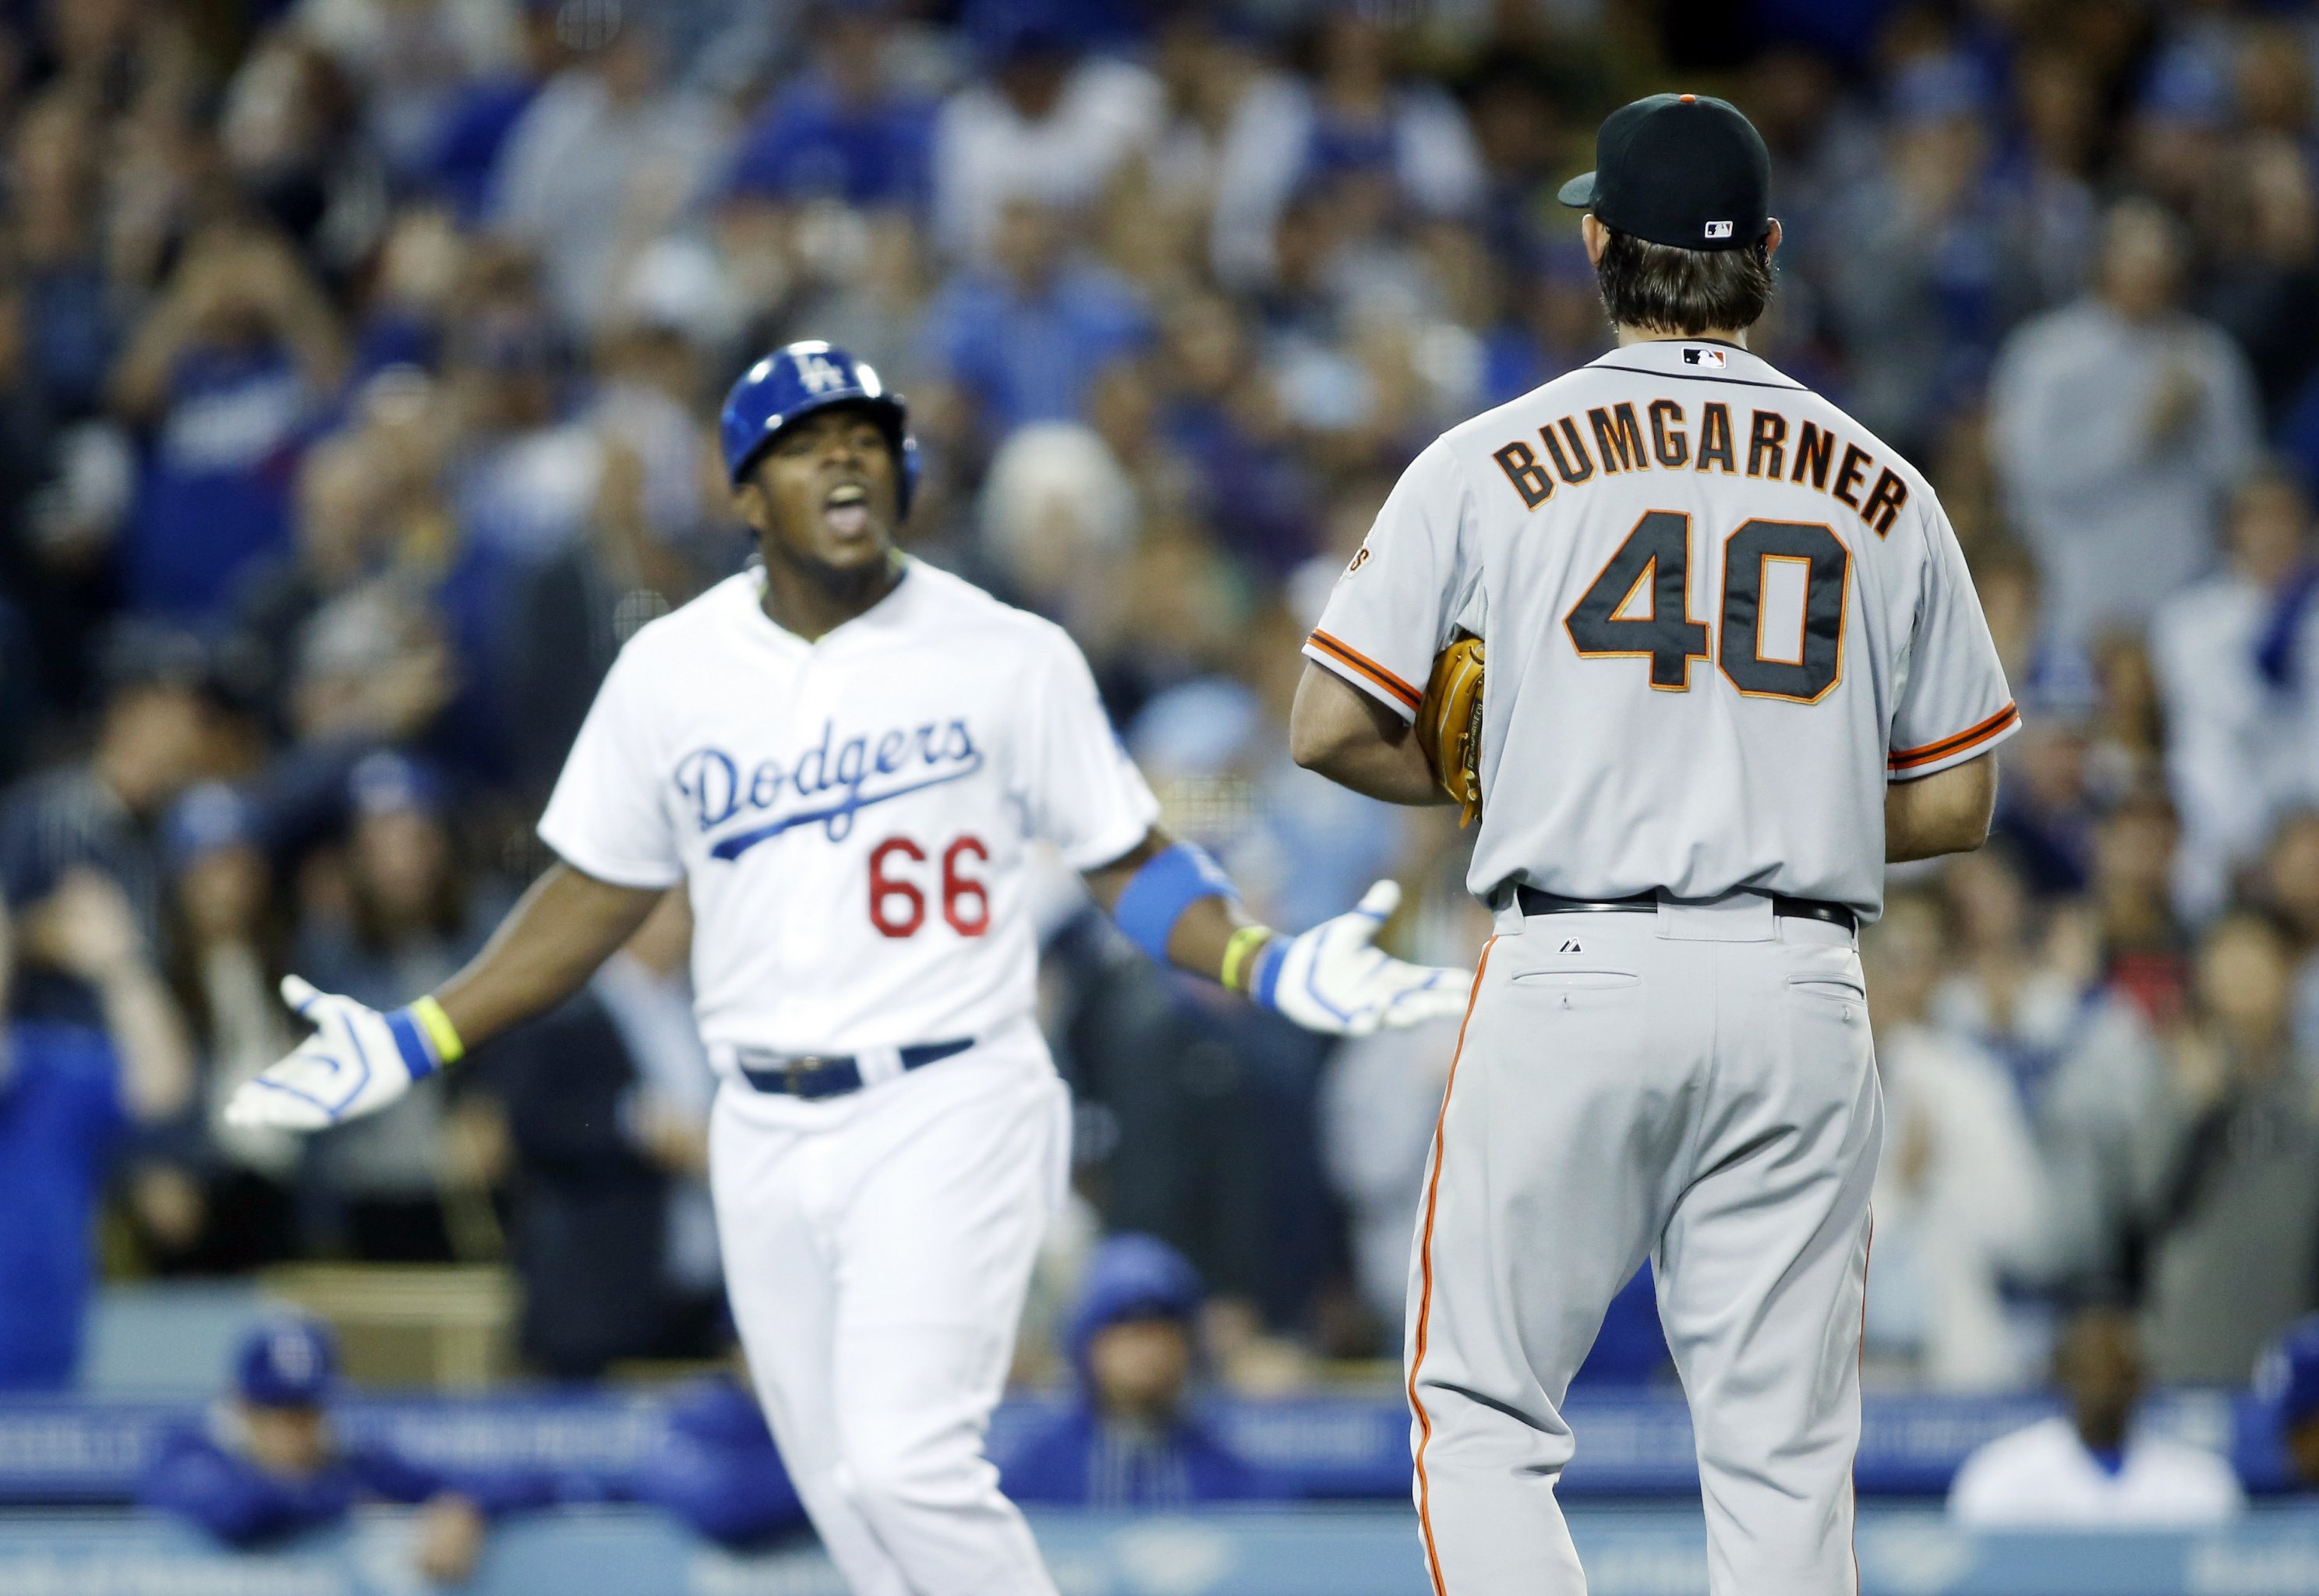 Analysis  Dodgers, Giants playoff game rekindles historic rivalry